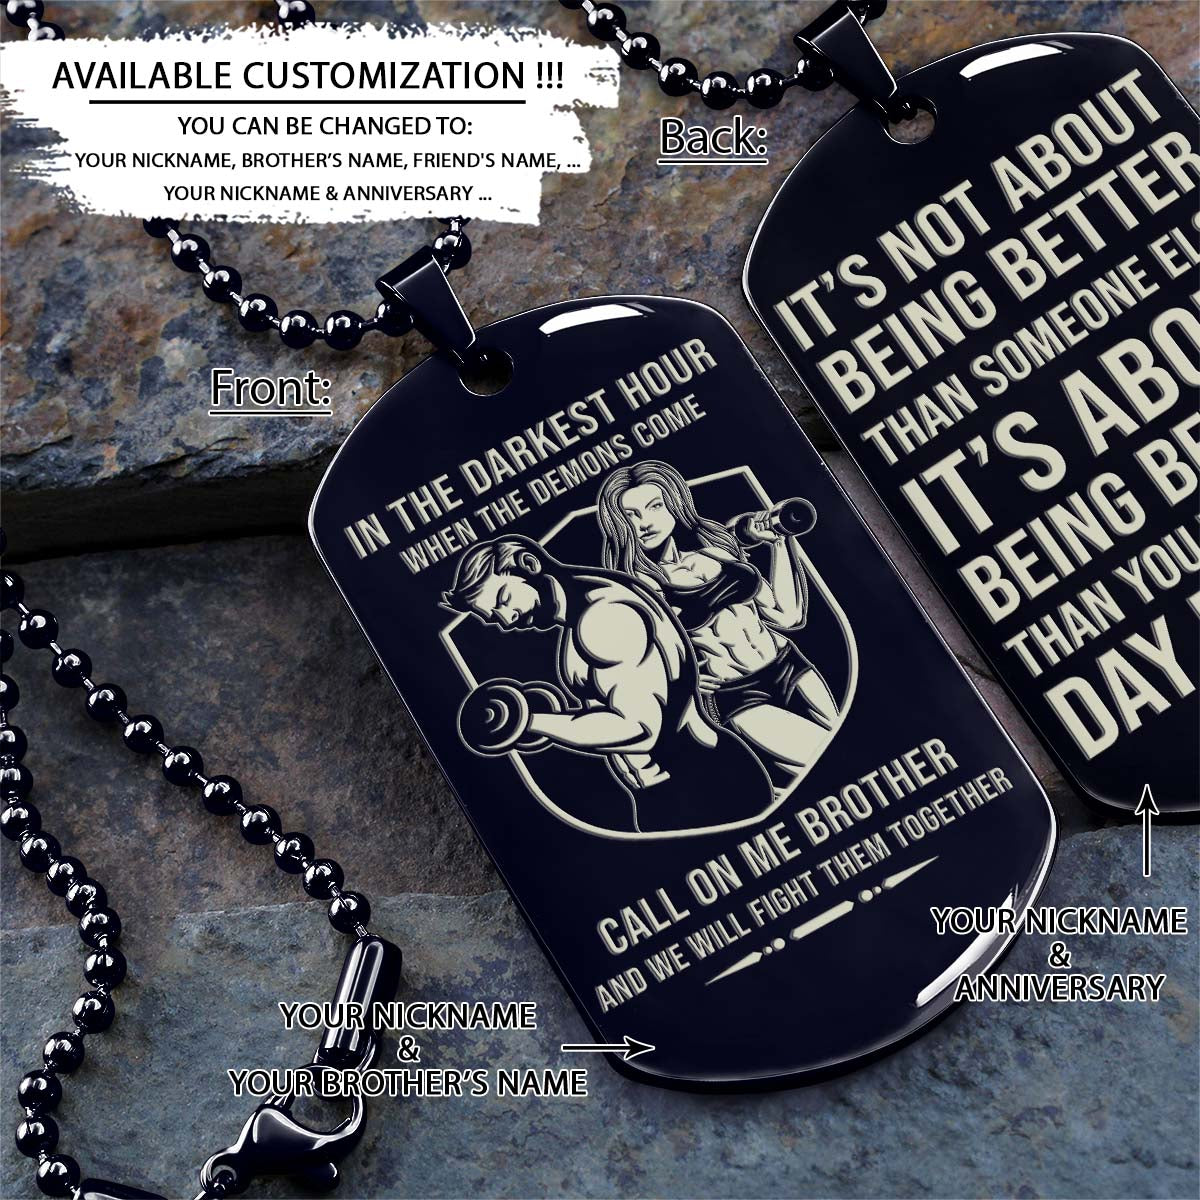 Call On Me Brother - It's About Being Better Than You Were The Day Before - Gym - Fitness Center - Workout - Gym Dog Tag - Gym Necklace - Engrave Dog Tag